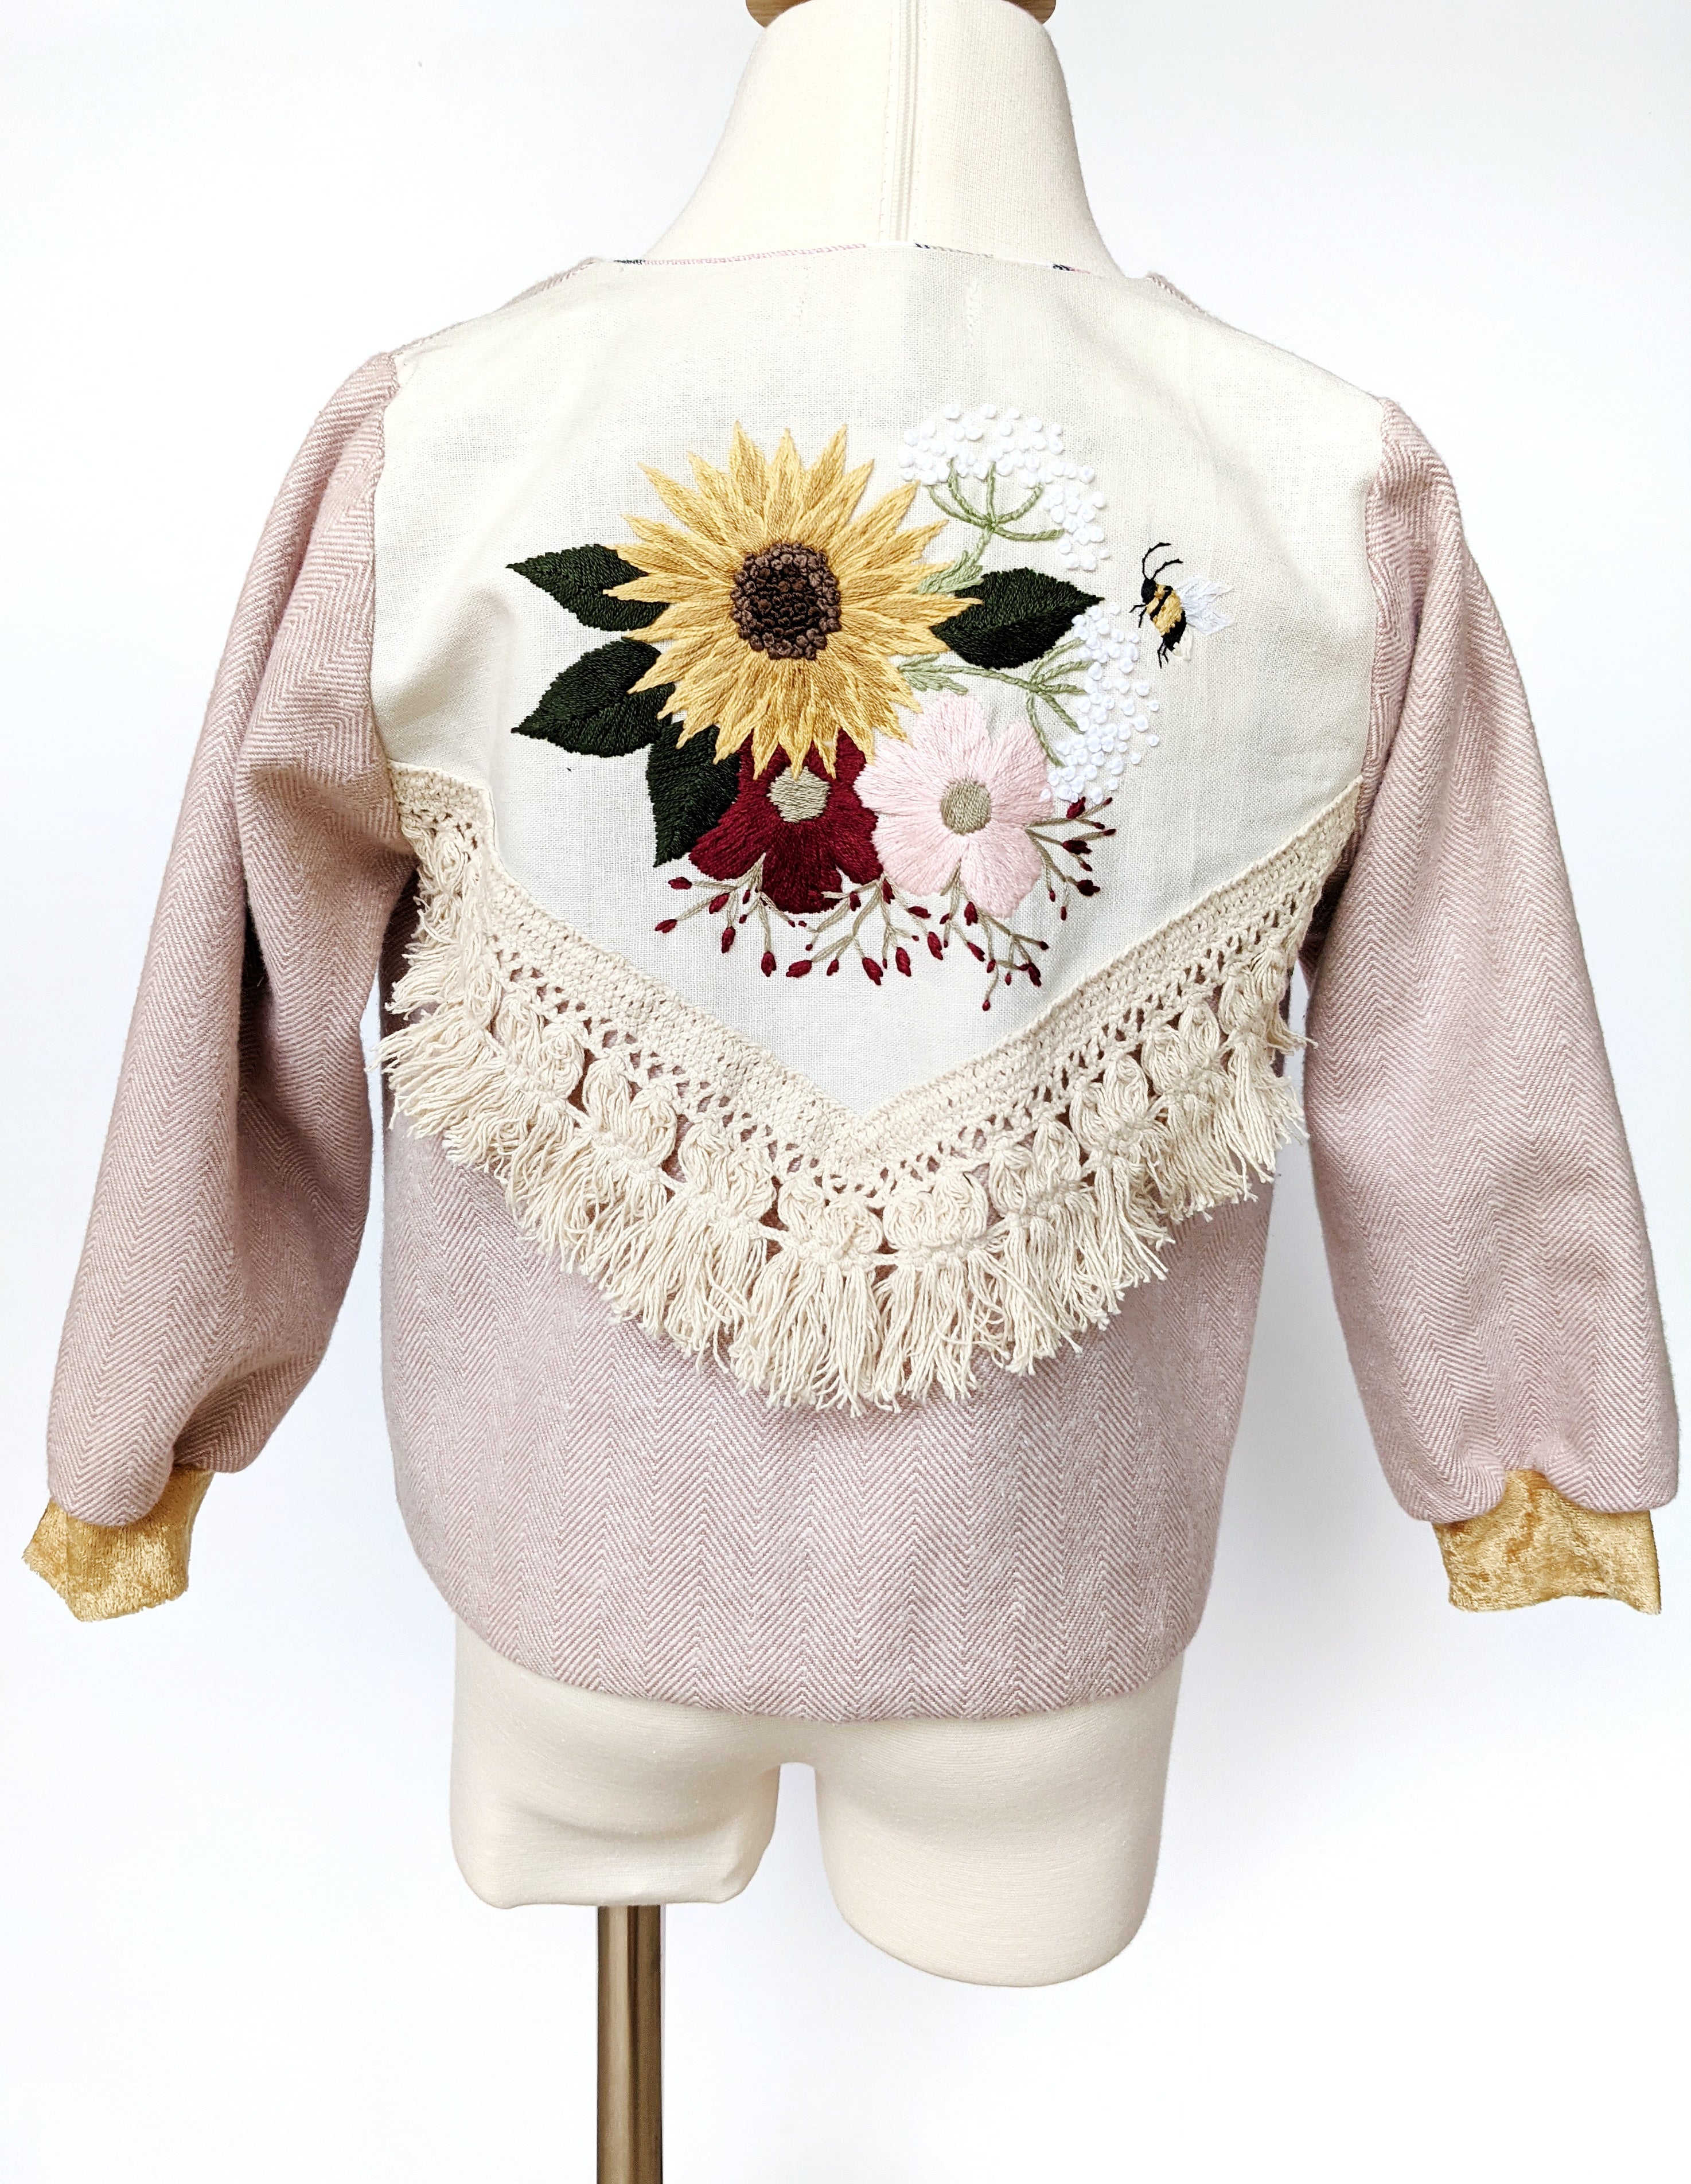 Made-to-Order Embroidered Jacket